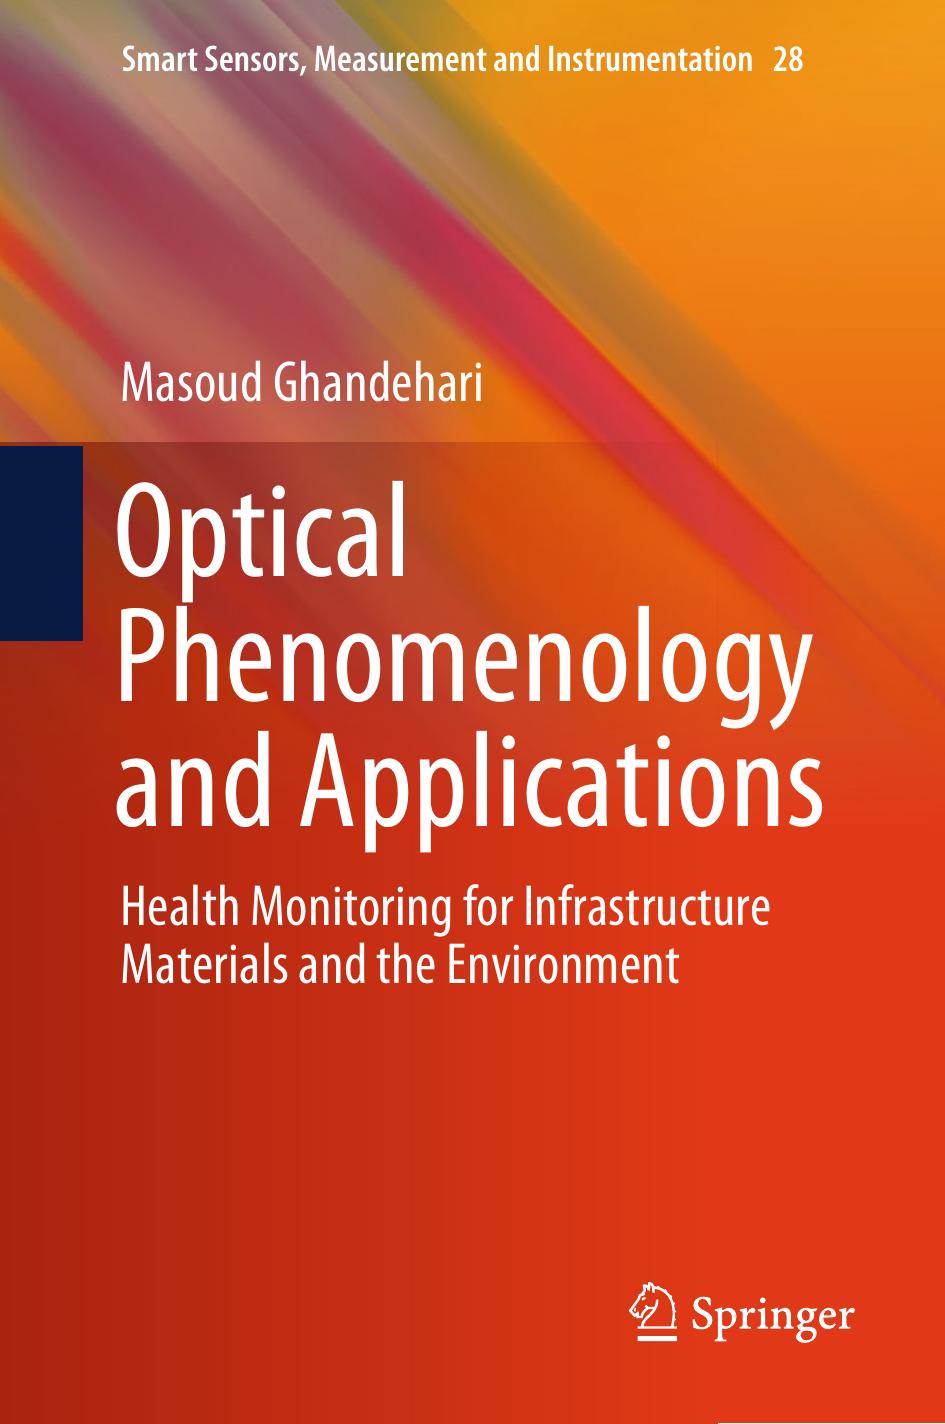 Optical Phenomenology and Applications by Masoud Ghandehari